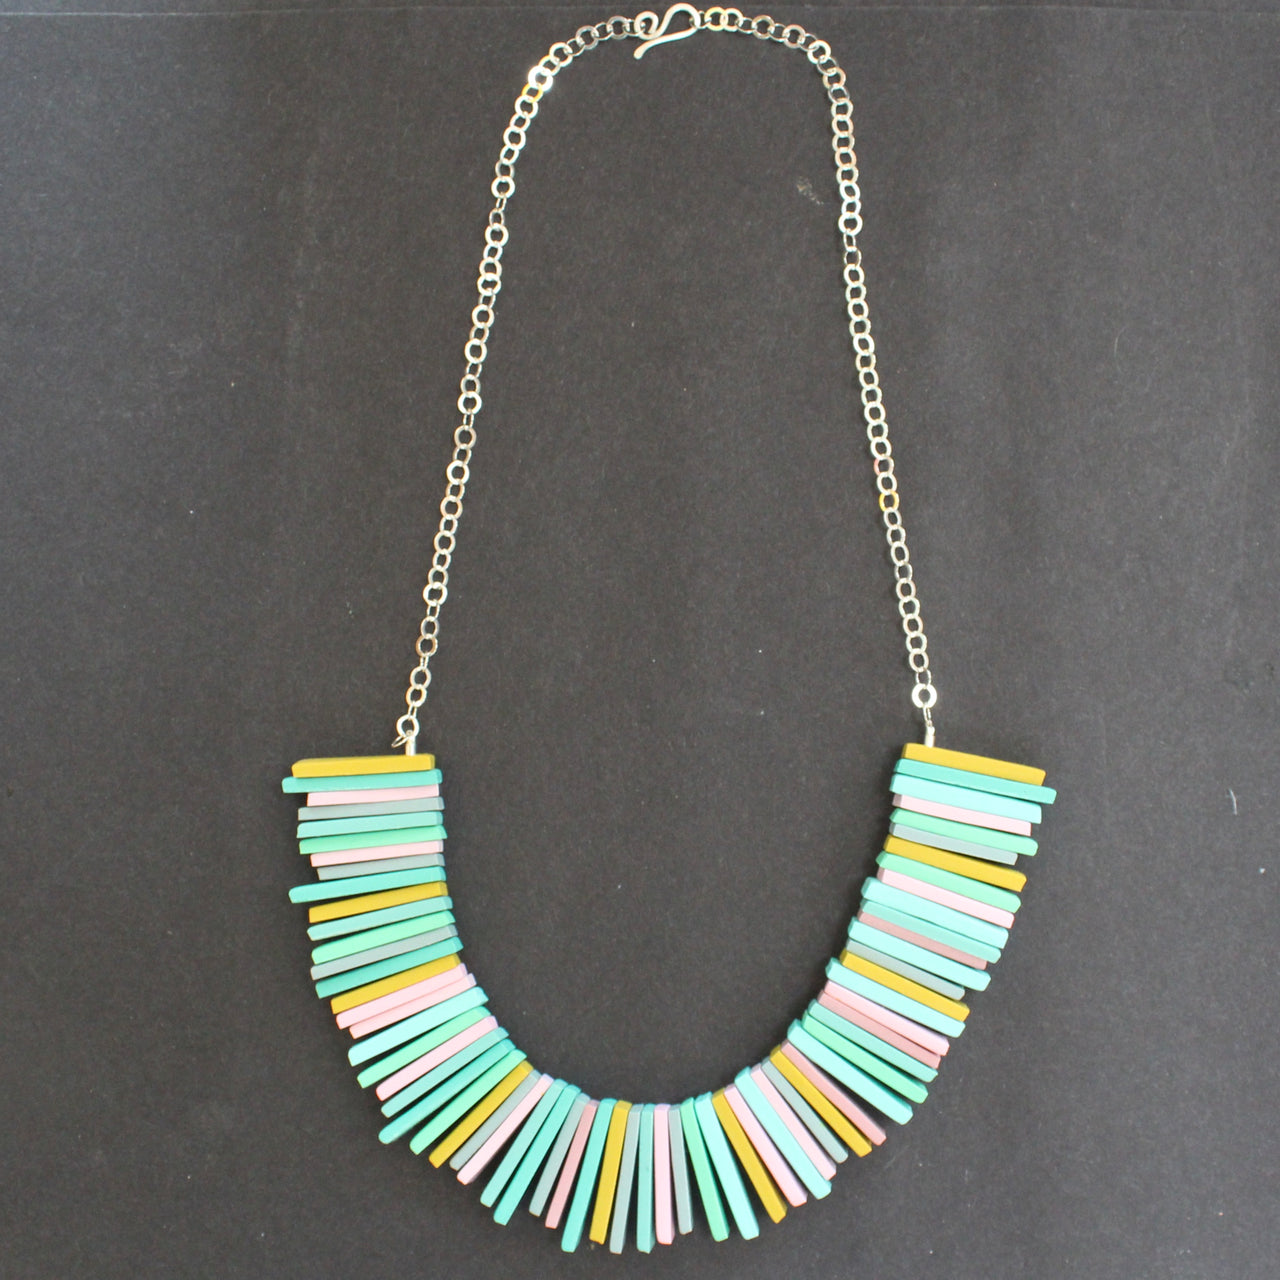 Clare Lloyd - Modern Deco Necklace in Pastels/Mustard